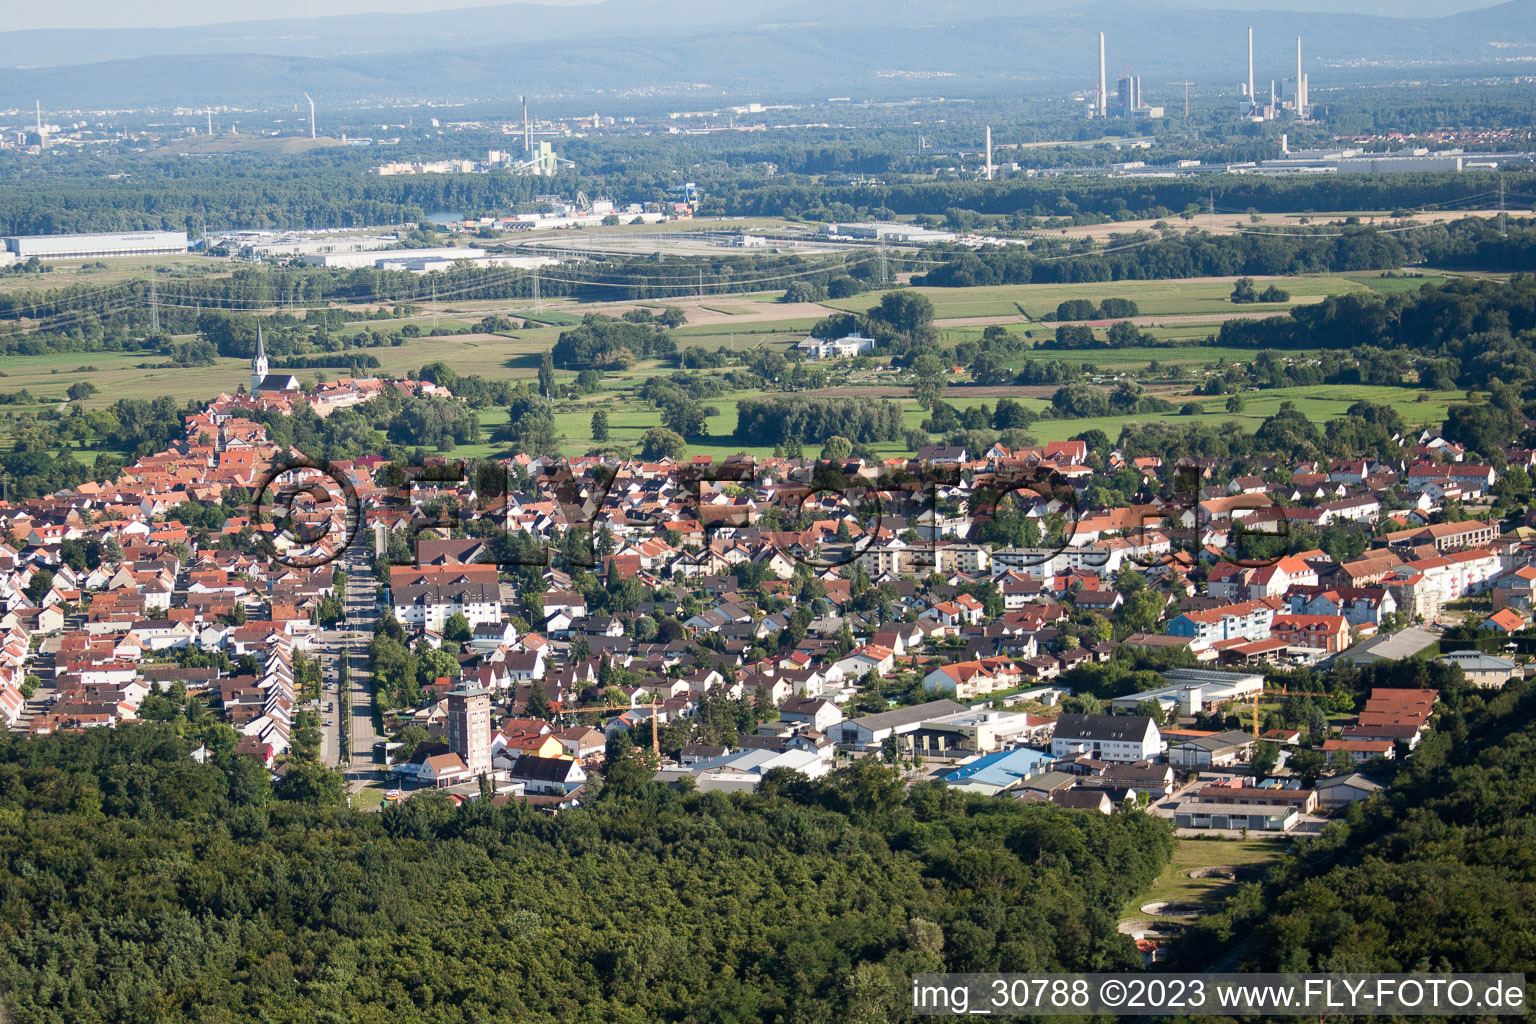 From the north in Jockgrim in the state Rhineland-Palatinate, Germany